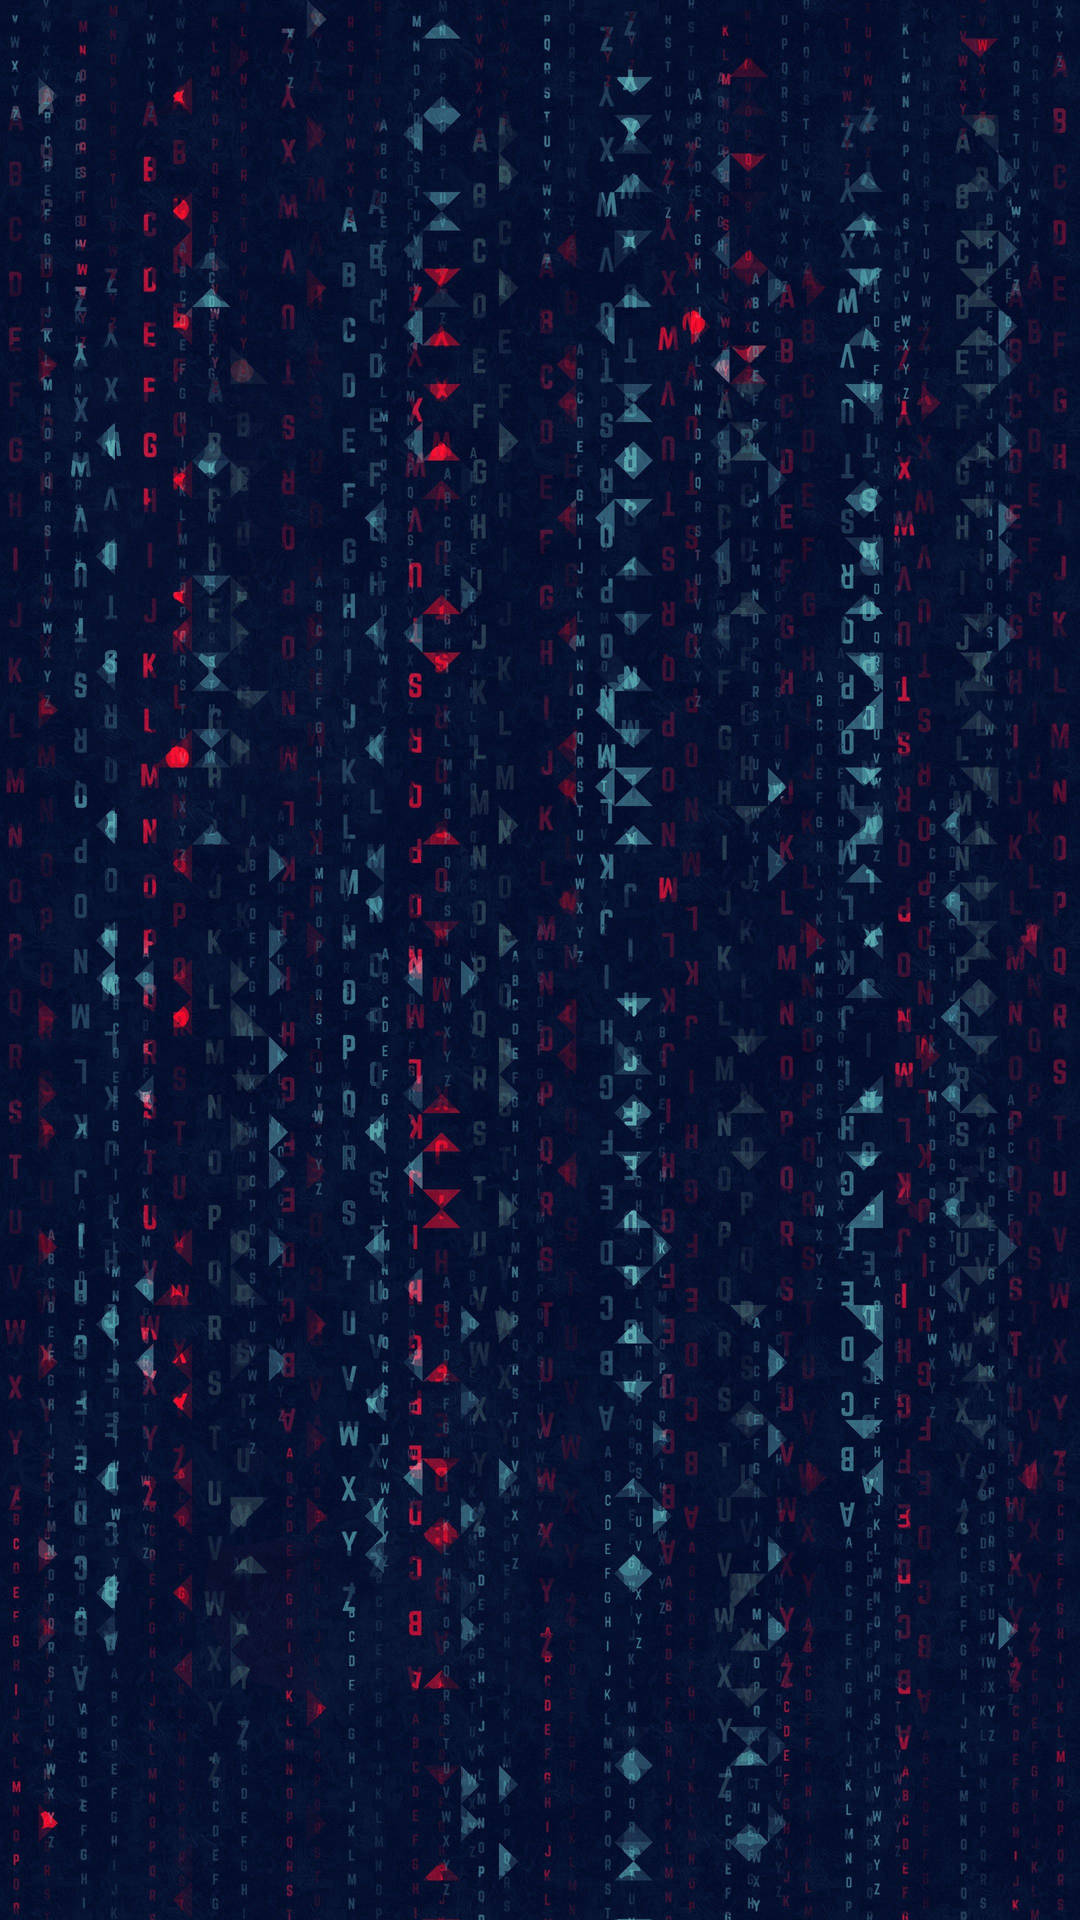 Find the answers in the Matrix Wallpaper